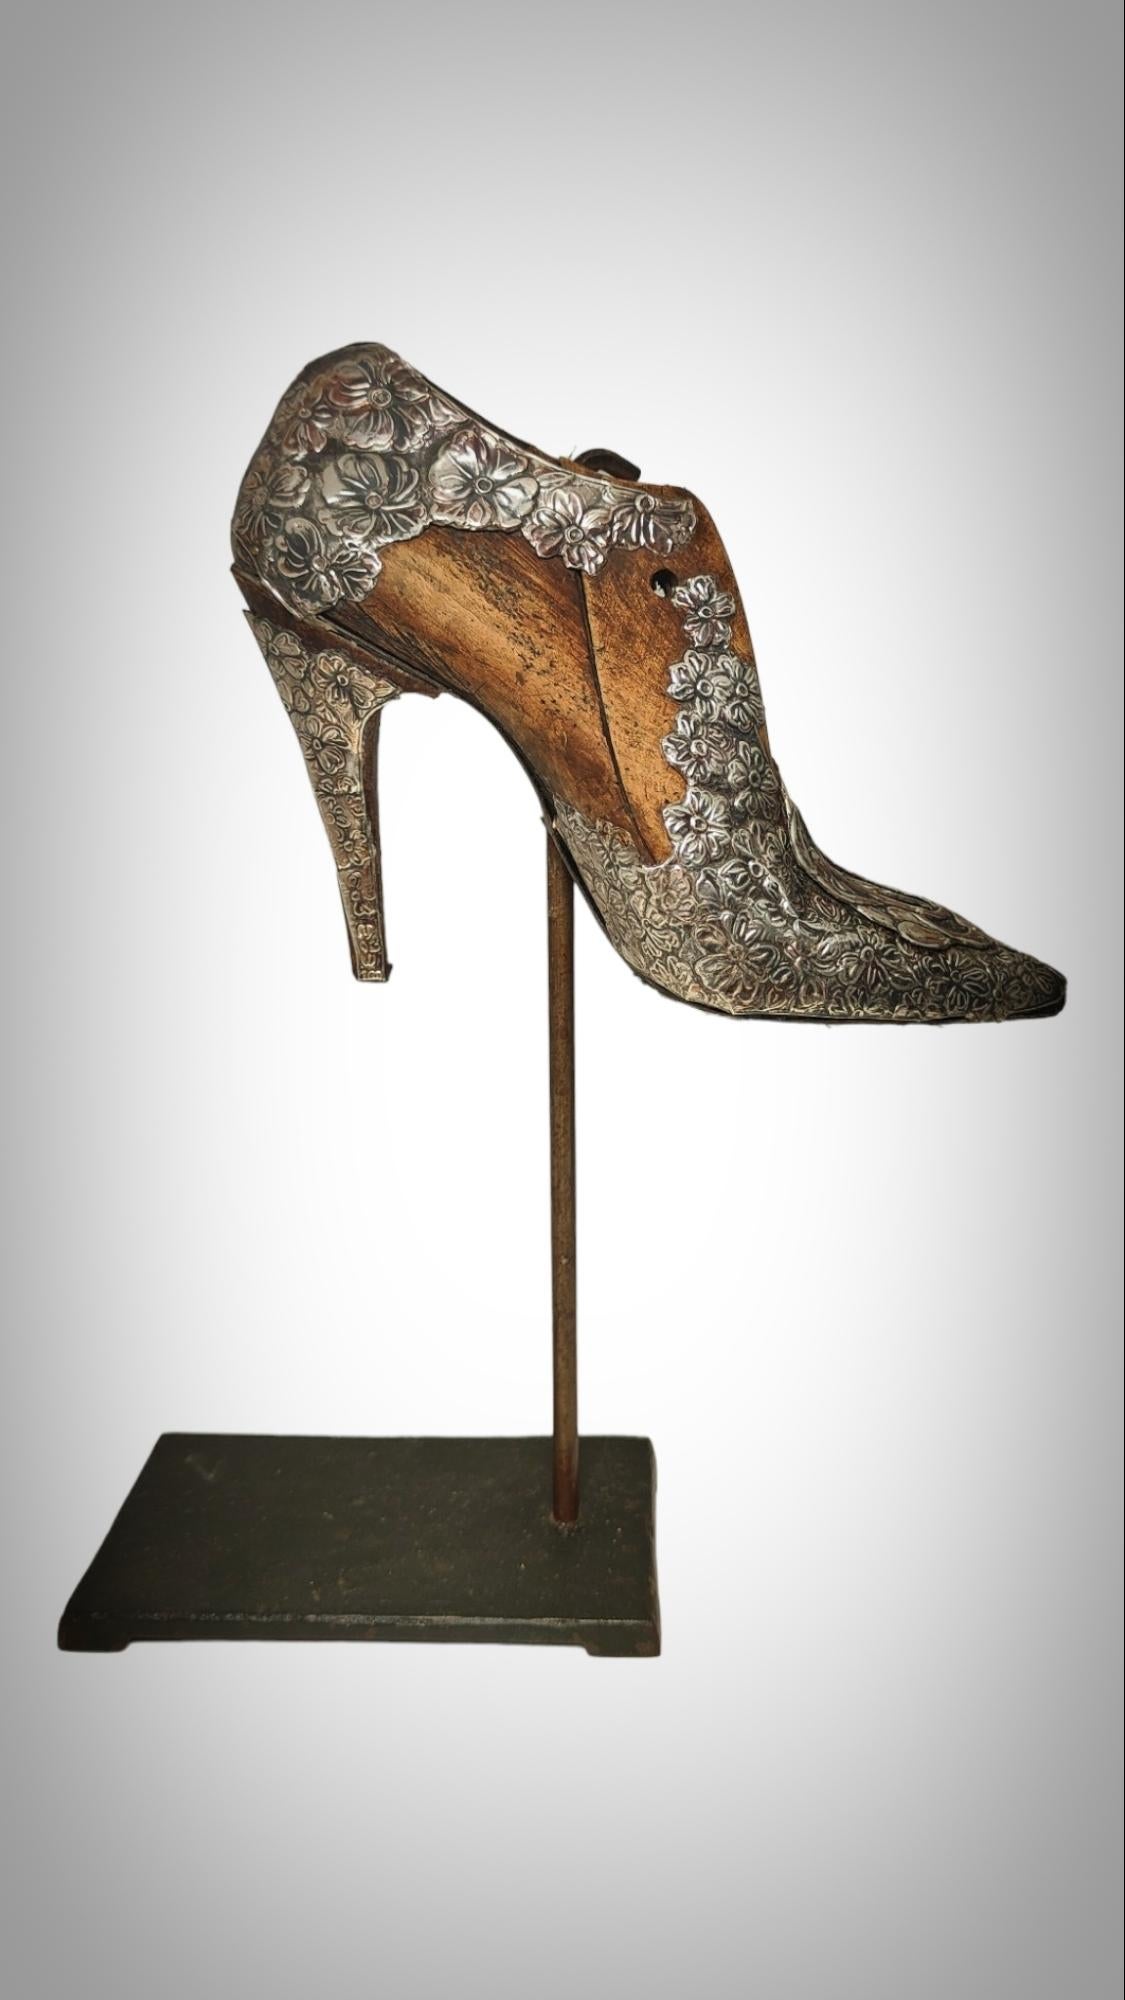 WOMEN'S HEELED SHOE MODEL OF THE 20'S
OLD SHOE SHAPE WITH HEEL IN WOOD AND SILVER METAL FROM THE EARLY 1900. SHOE MEASUREMENTS: 24X19X9 cm